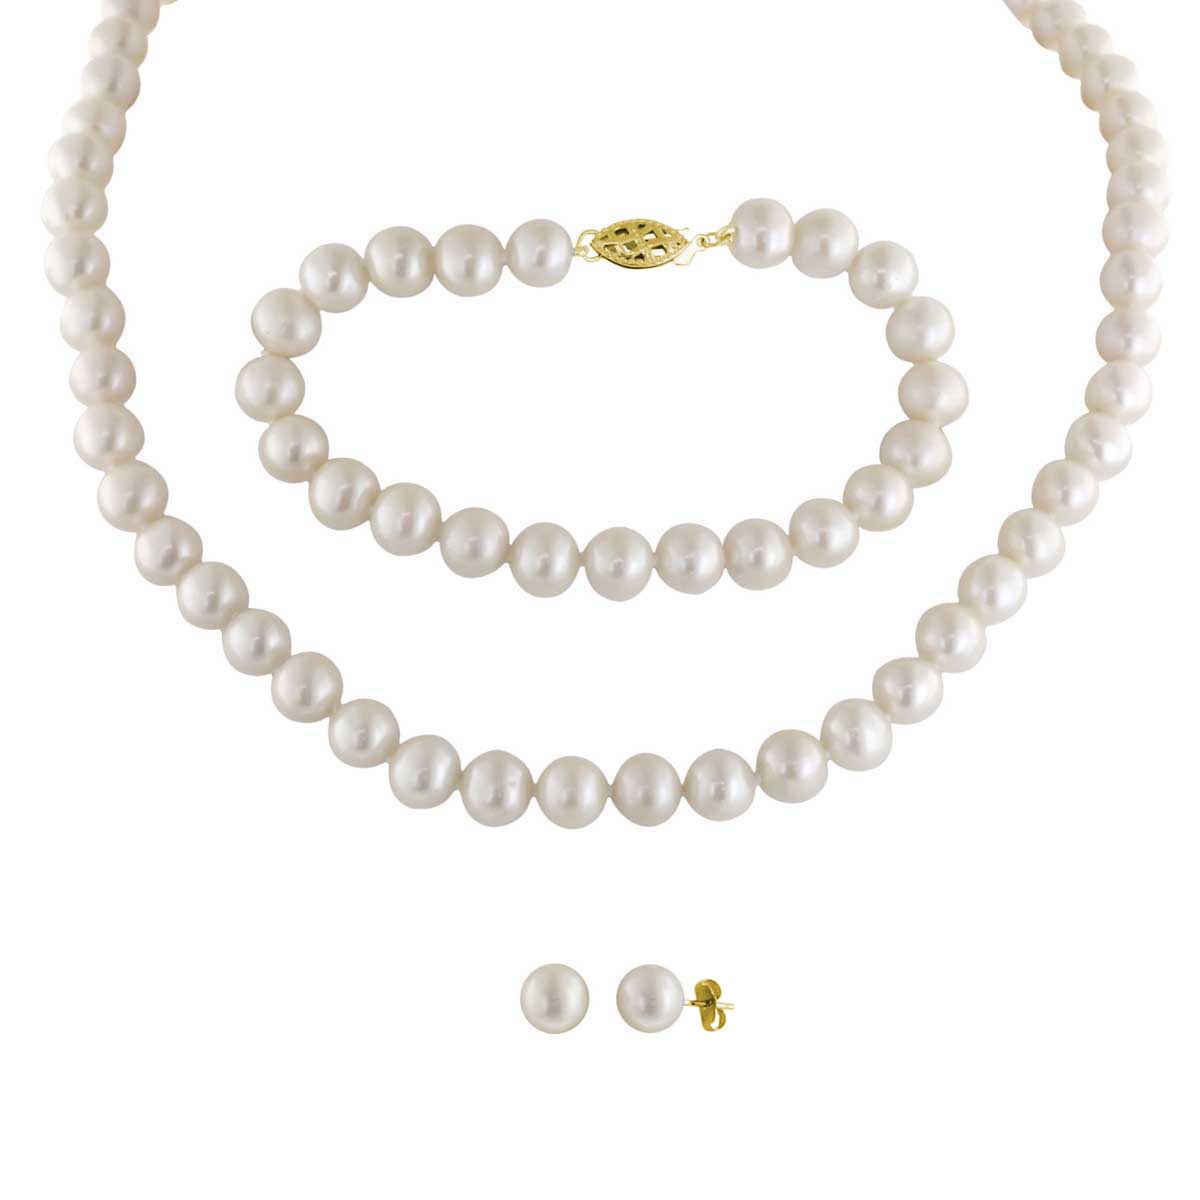 Cultured Freshwater Pearl Earrings Necklace and Bracelet Set in 14kt Yellow Gold (7-8mm pearls)